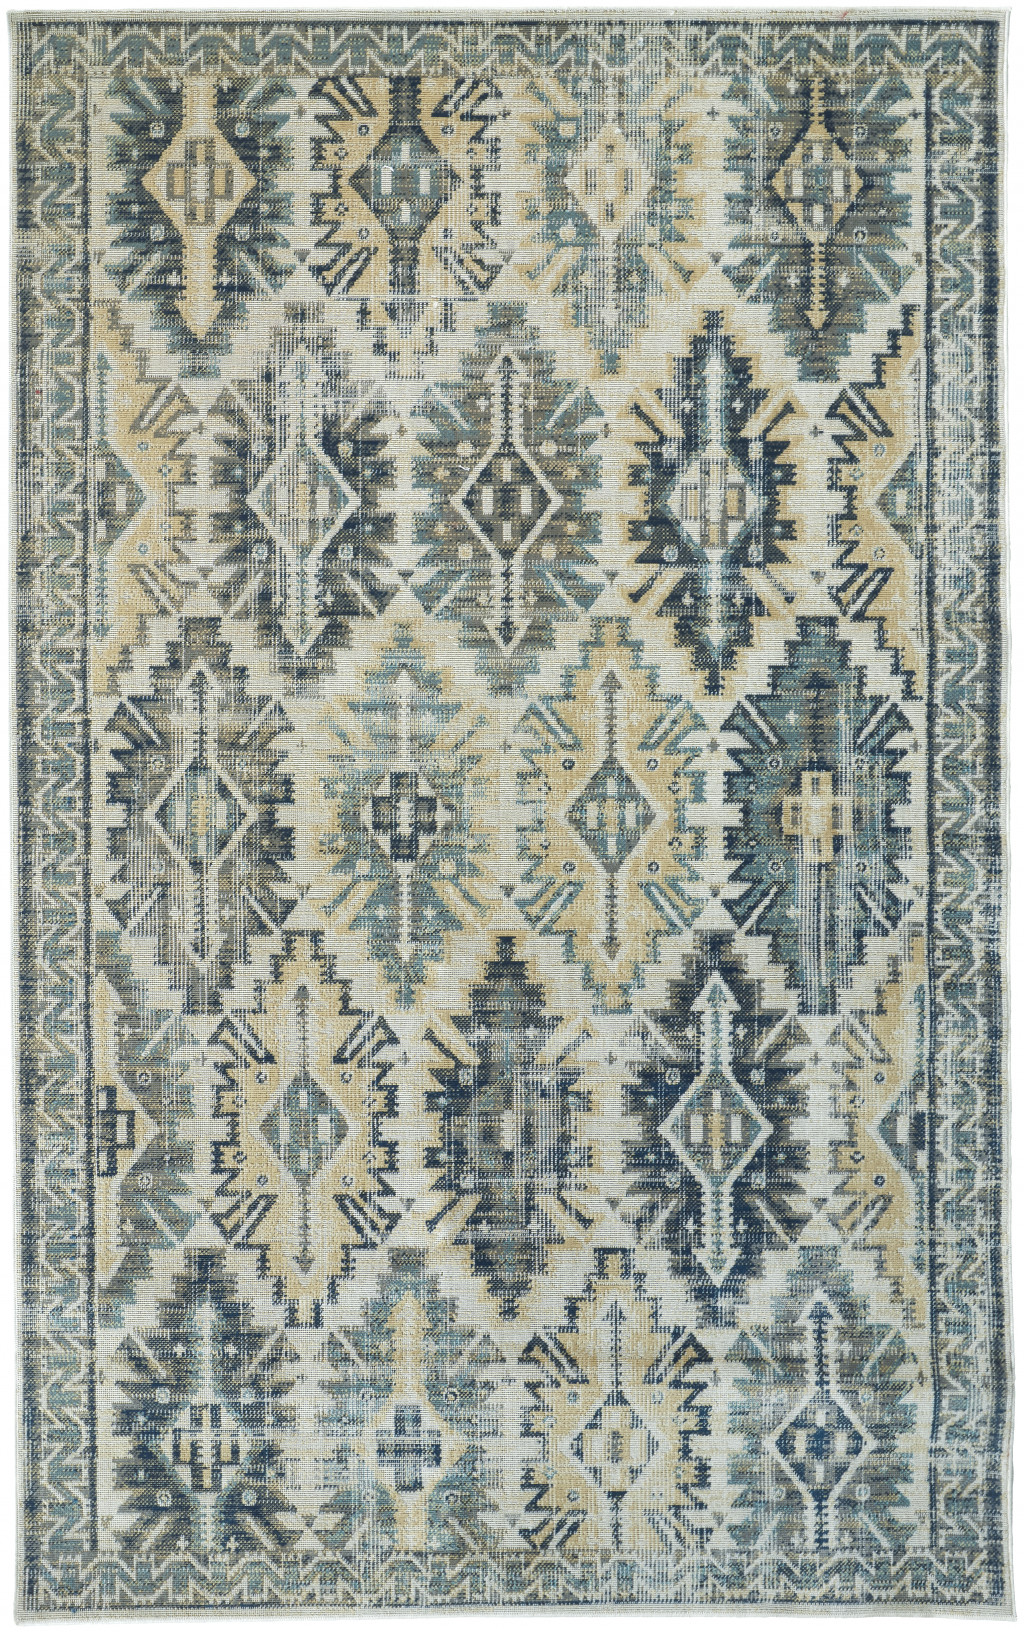 10' X 13' Green Blue And Ivory Abstract Power Loom Distressed Stain Resistant Area Rug-514643-1